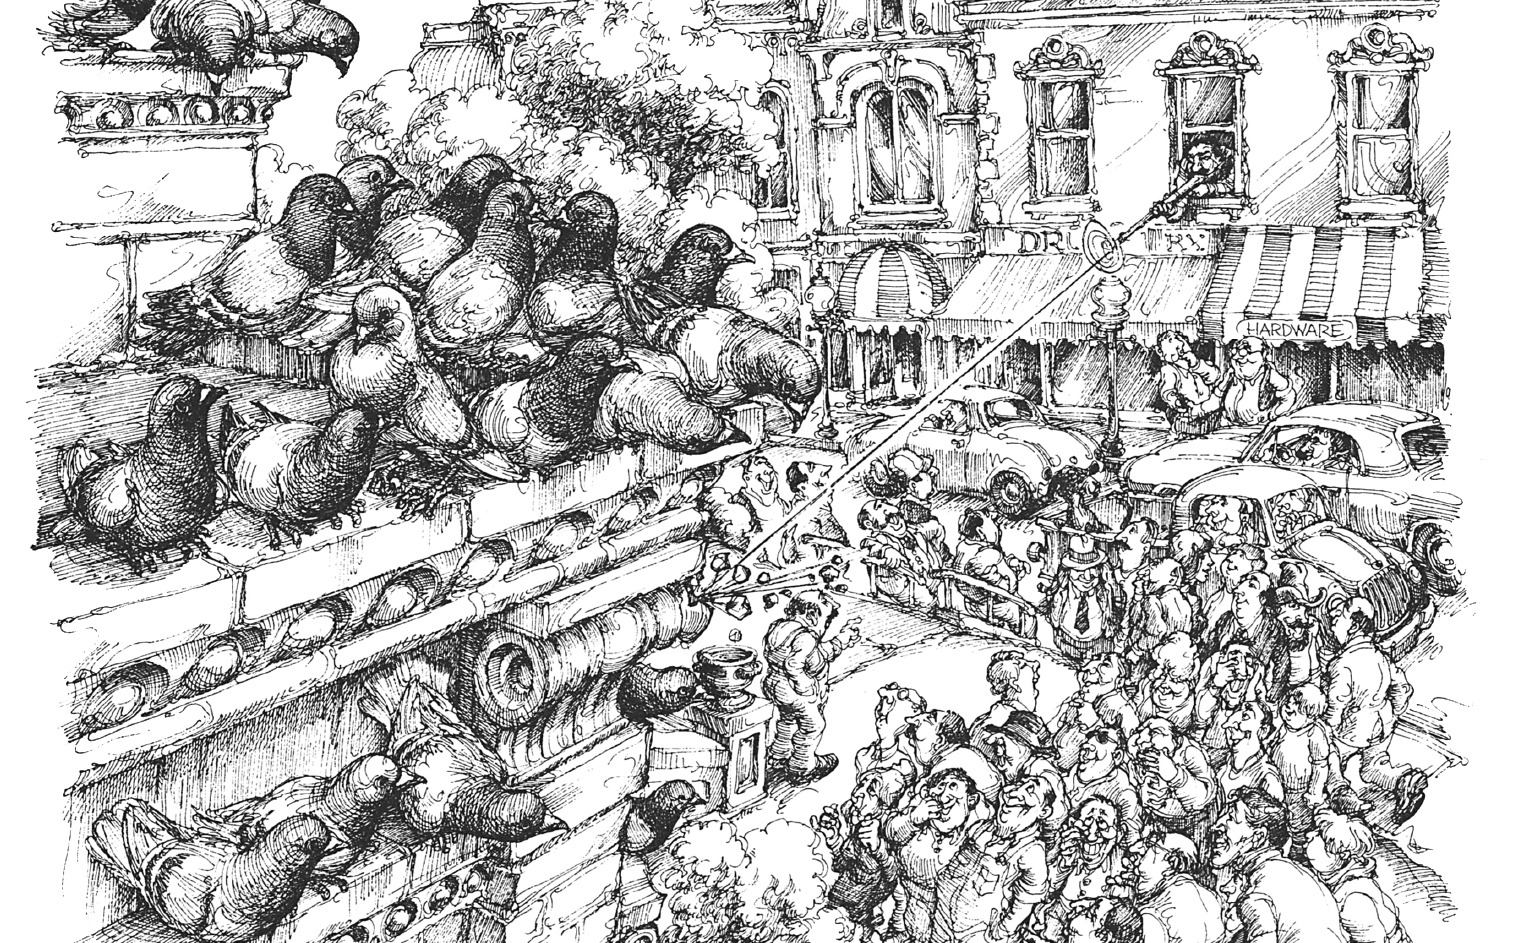 A black and white illustration of pigeons on a building, a crowd, and a man shooting at the pigeons from a window.